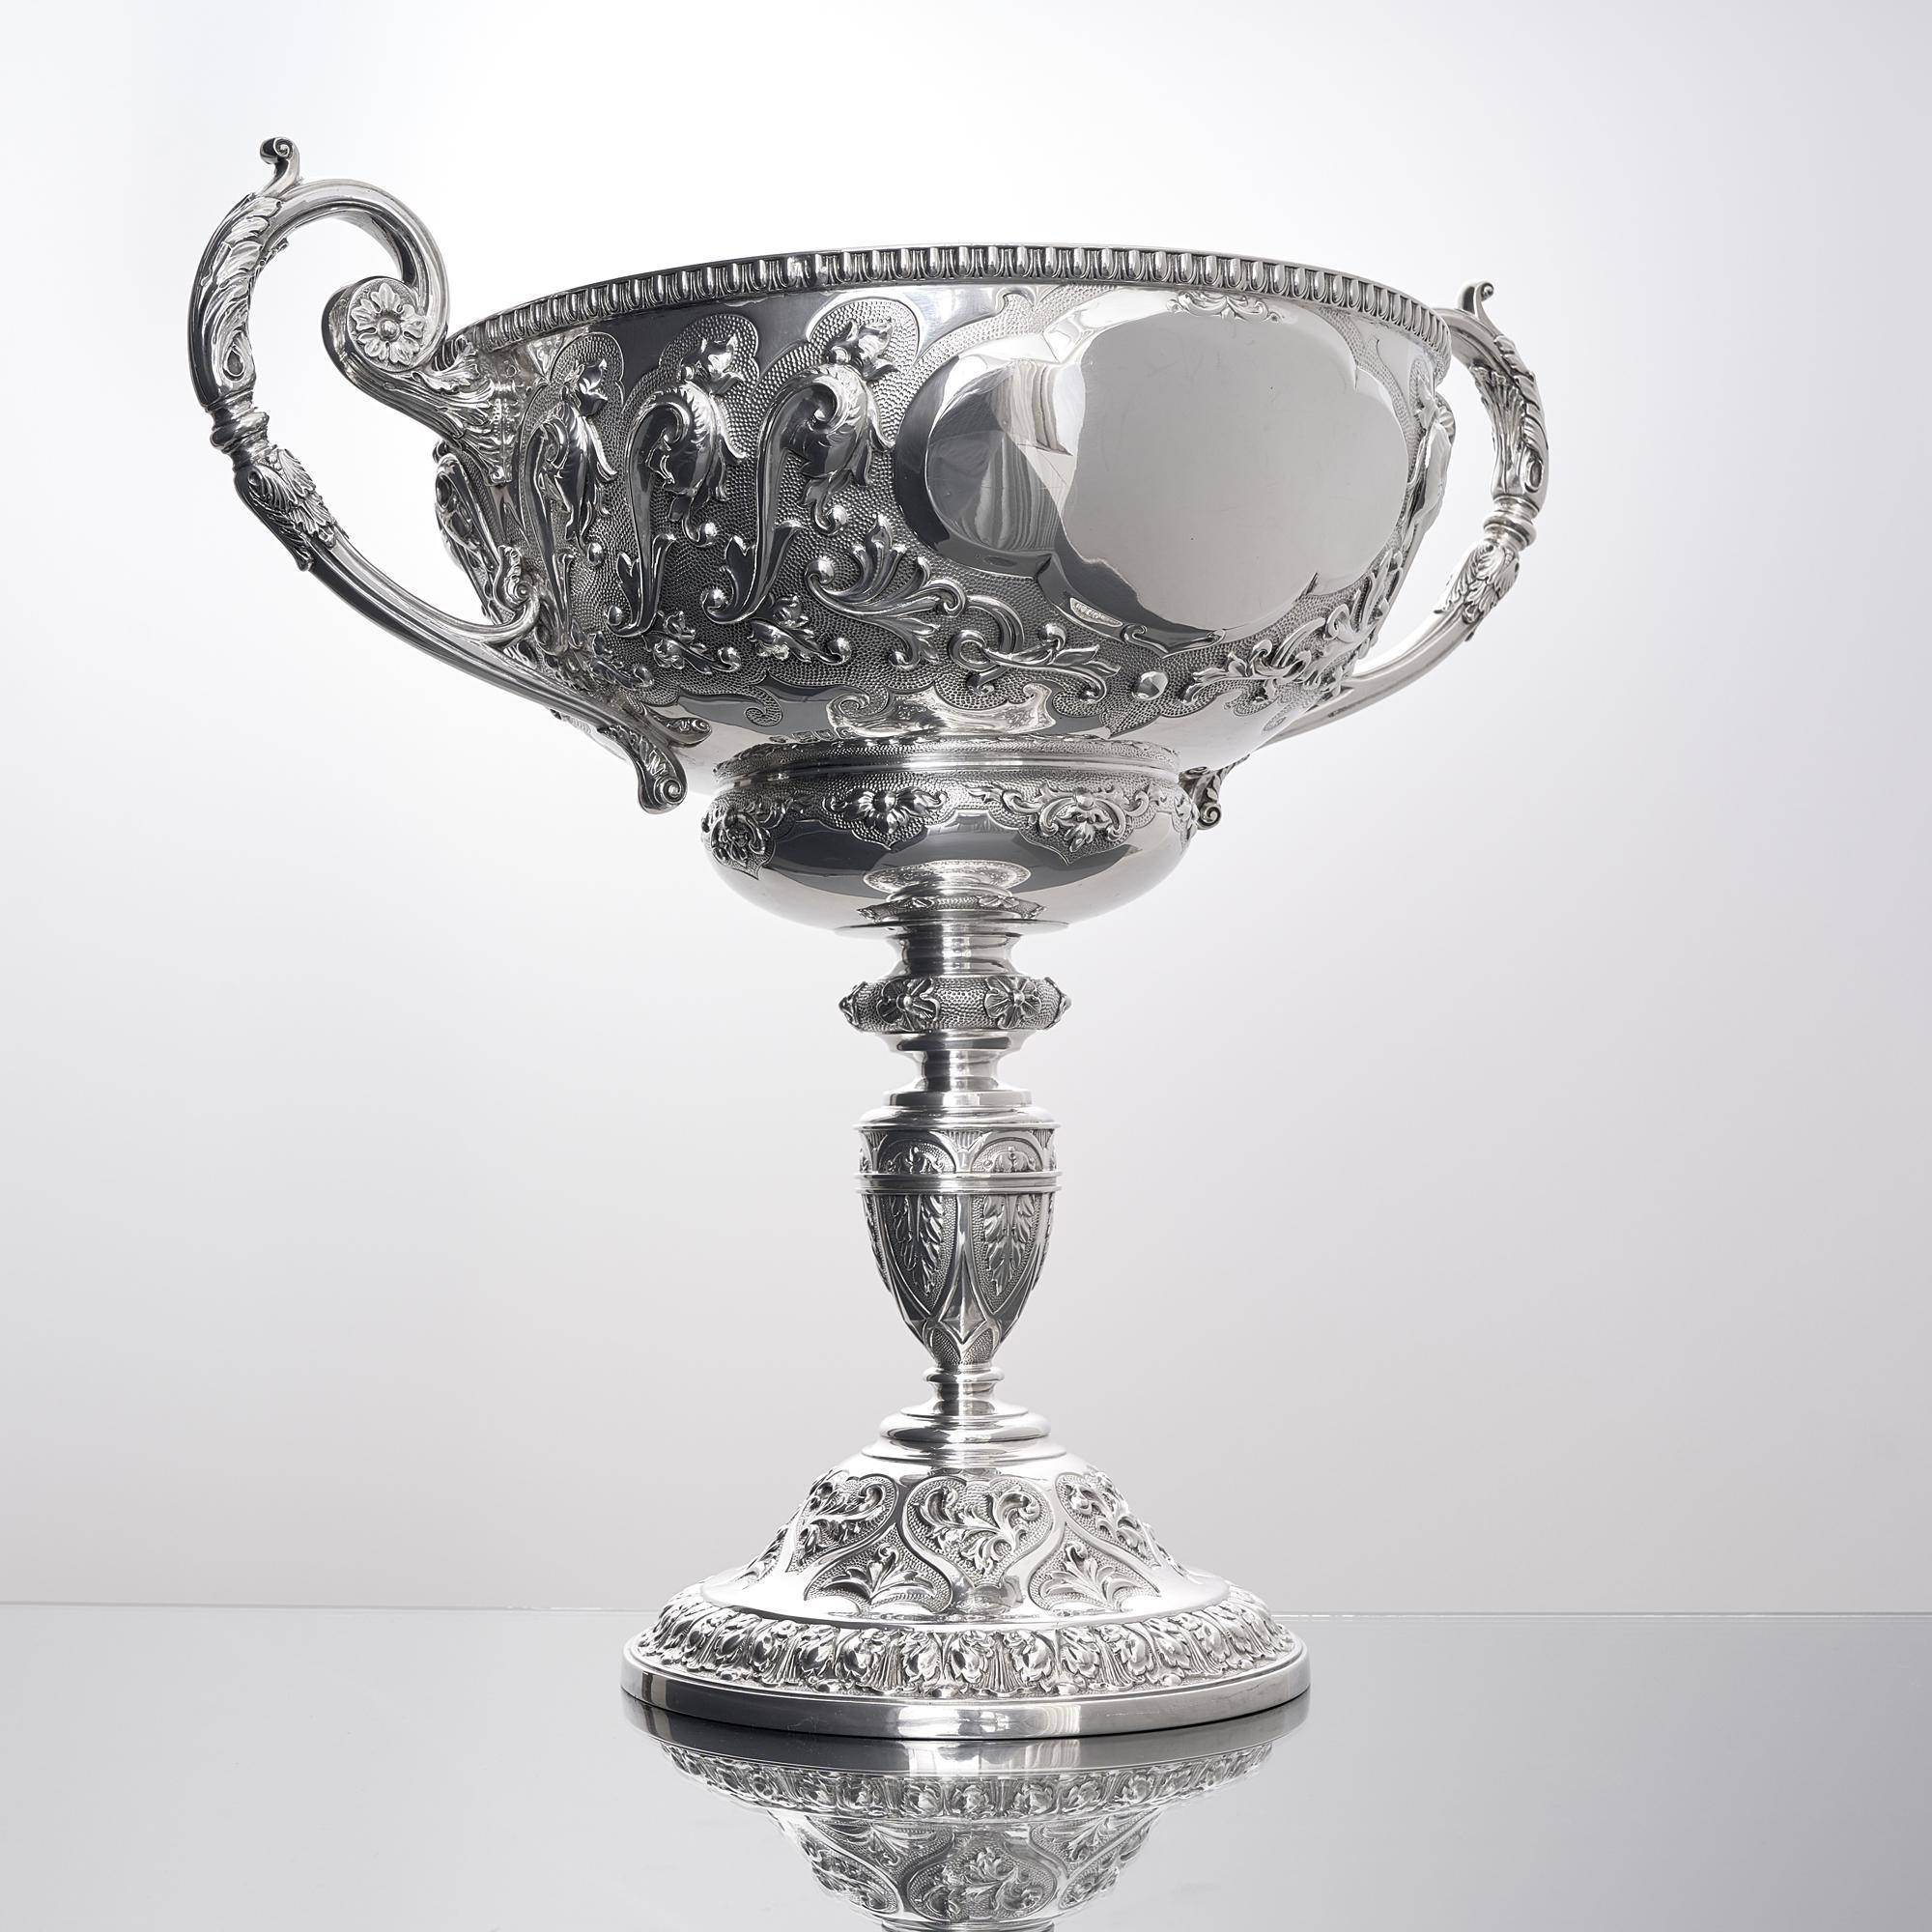 Two-handled antique sterling silver trophy comport 1